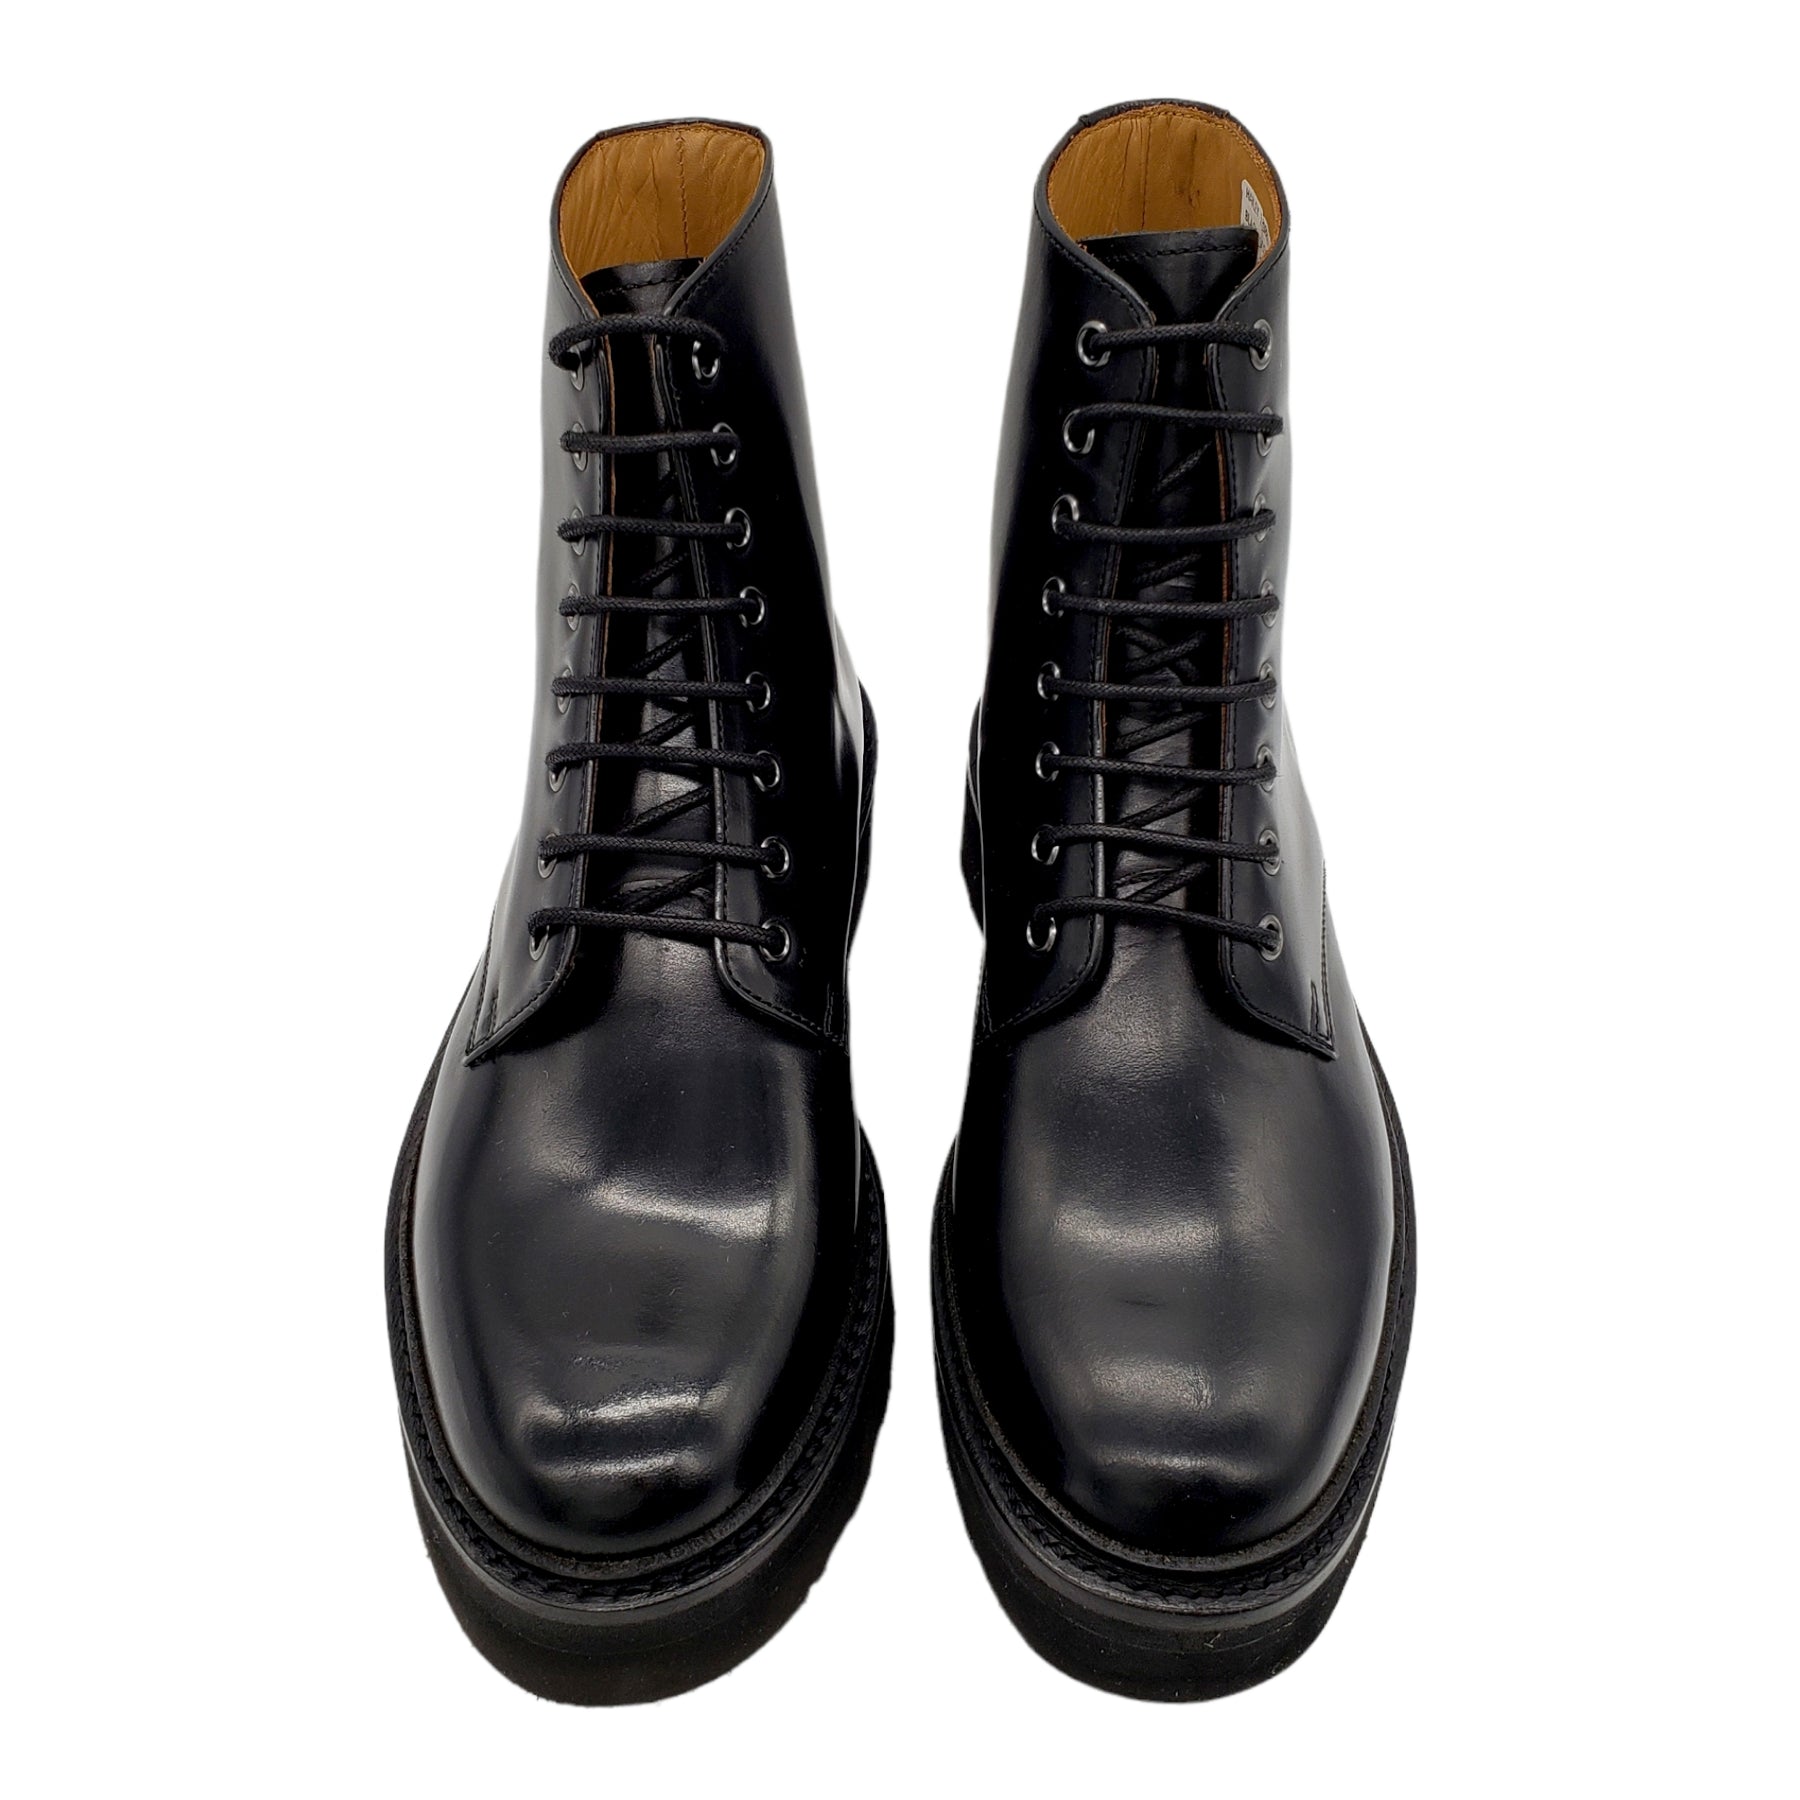 Grenson Hailey Black Leather Ankle Boots